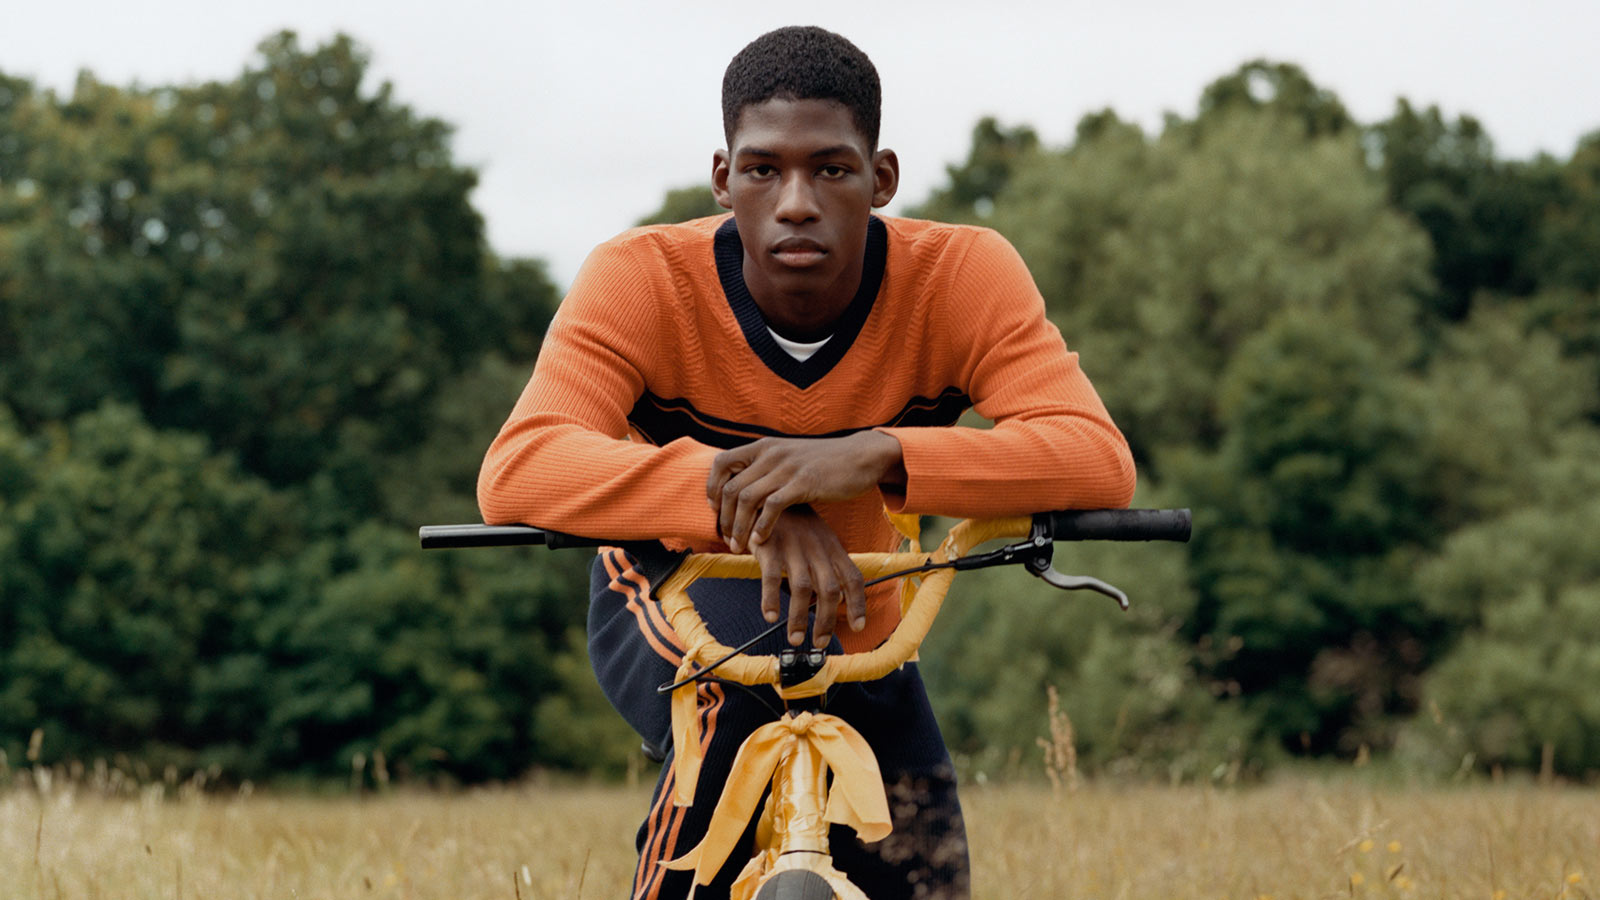 Gear Up For The adidas Originals x Wales Bonner A/W 2021